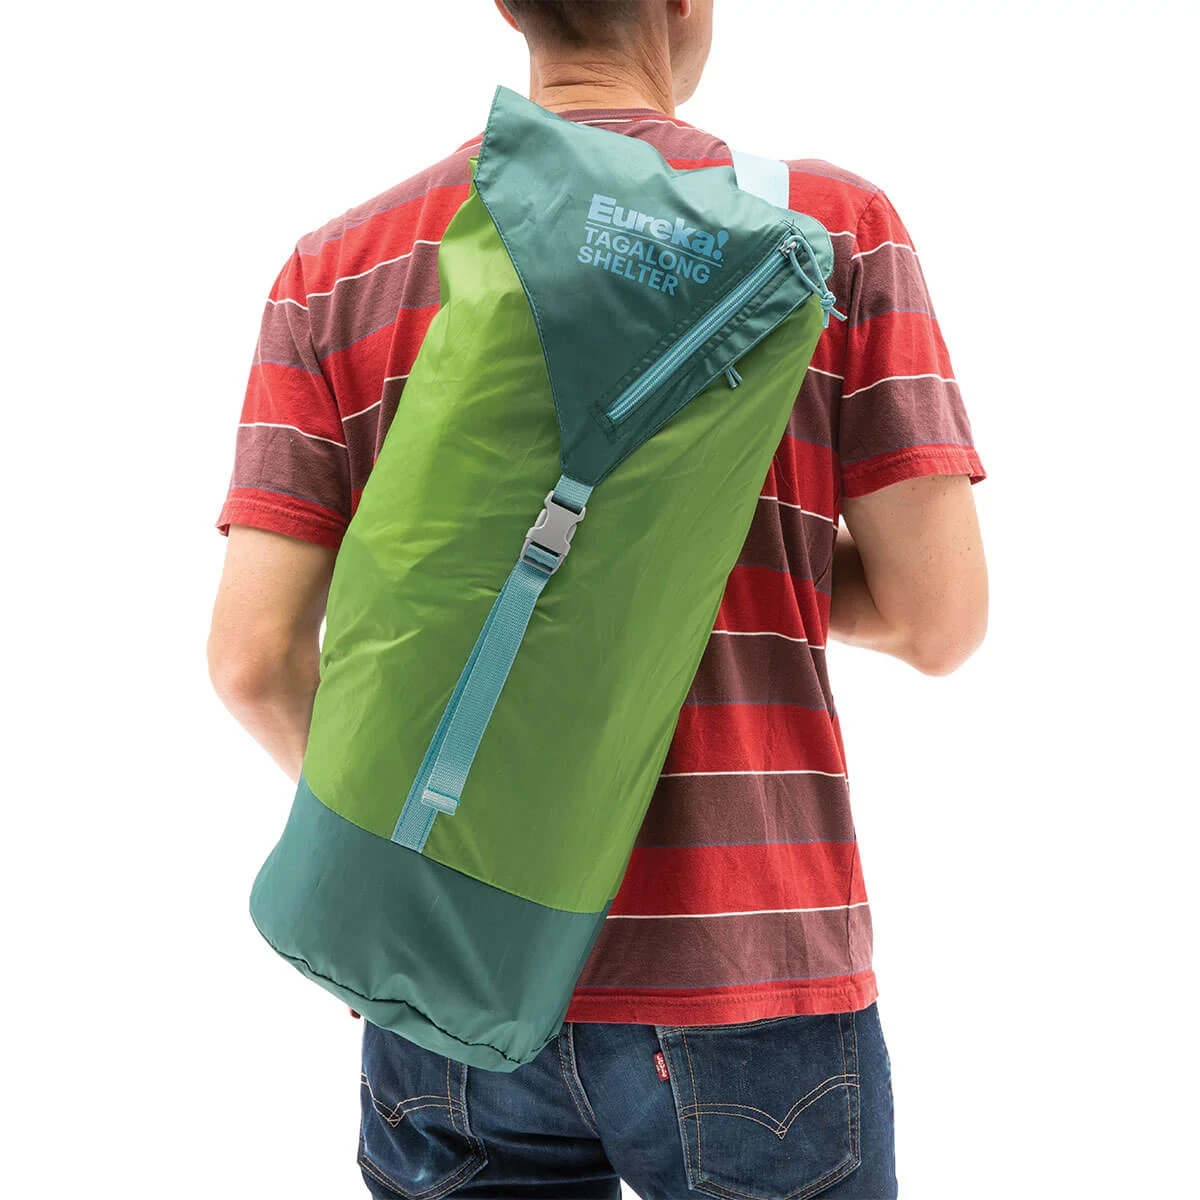 Man carrying Eureka! Tagalong Shelter packed in Carry Bag